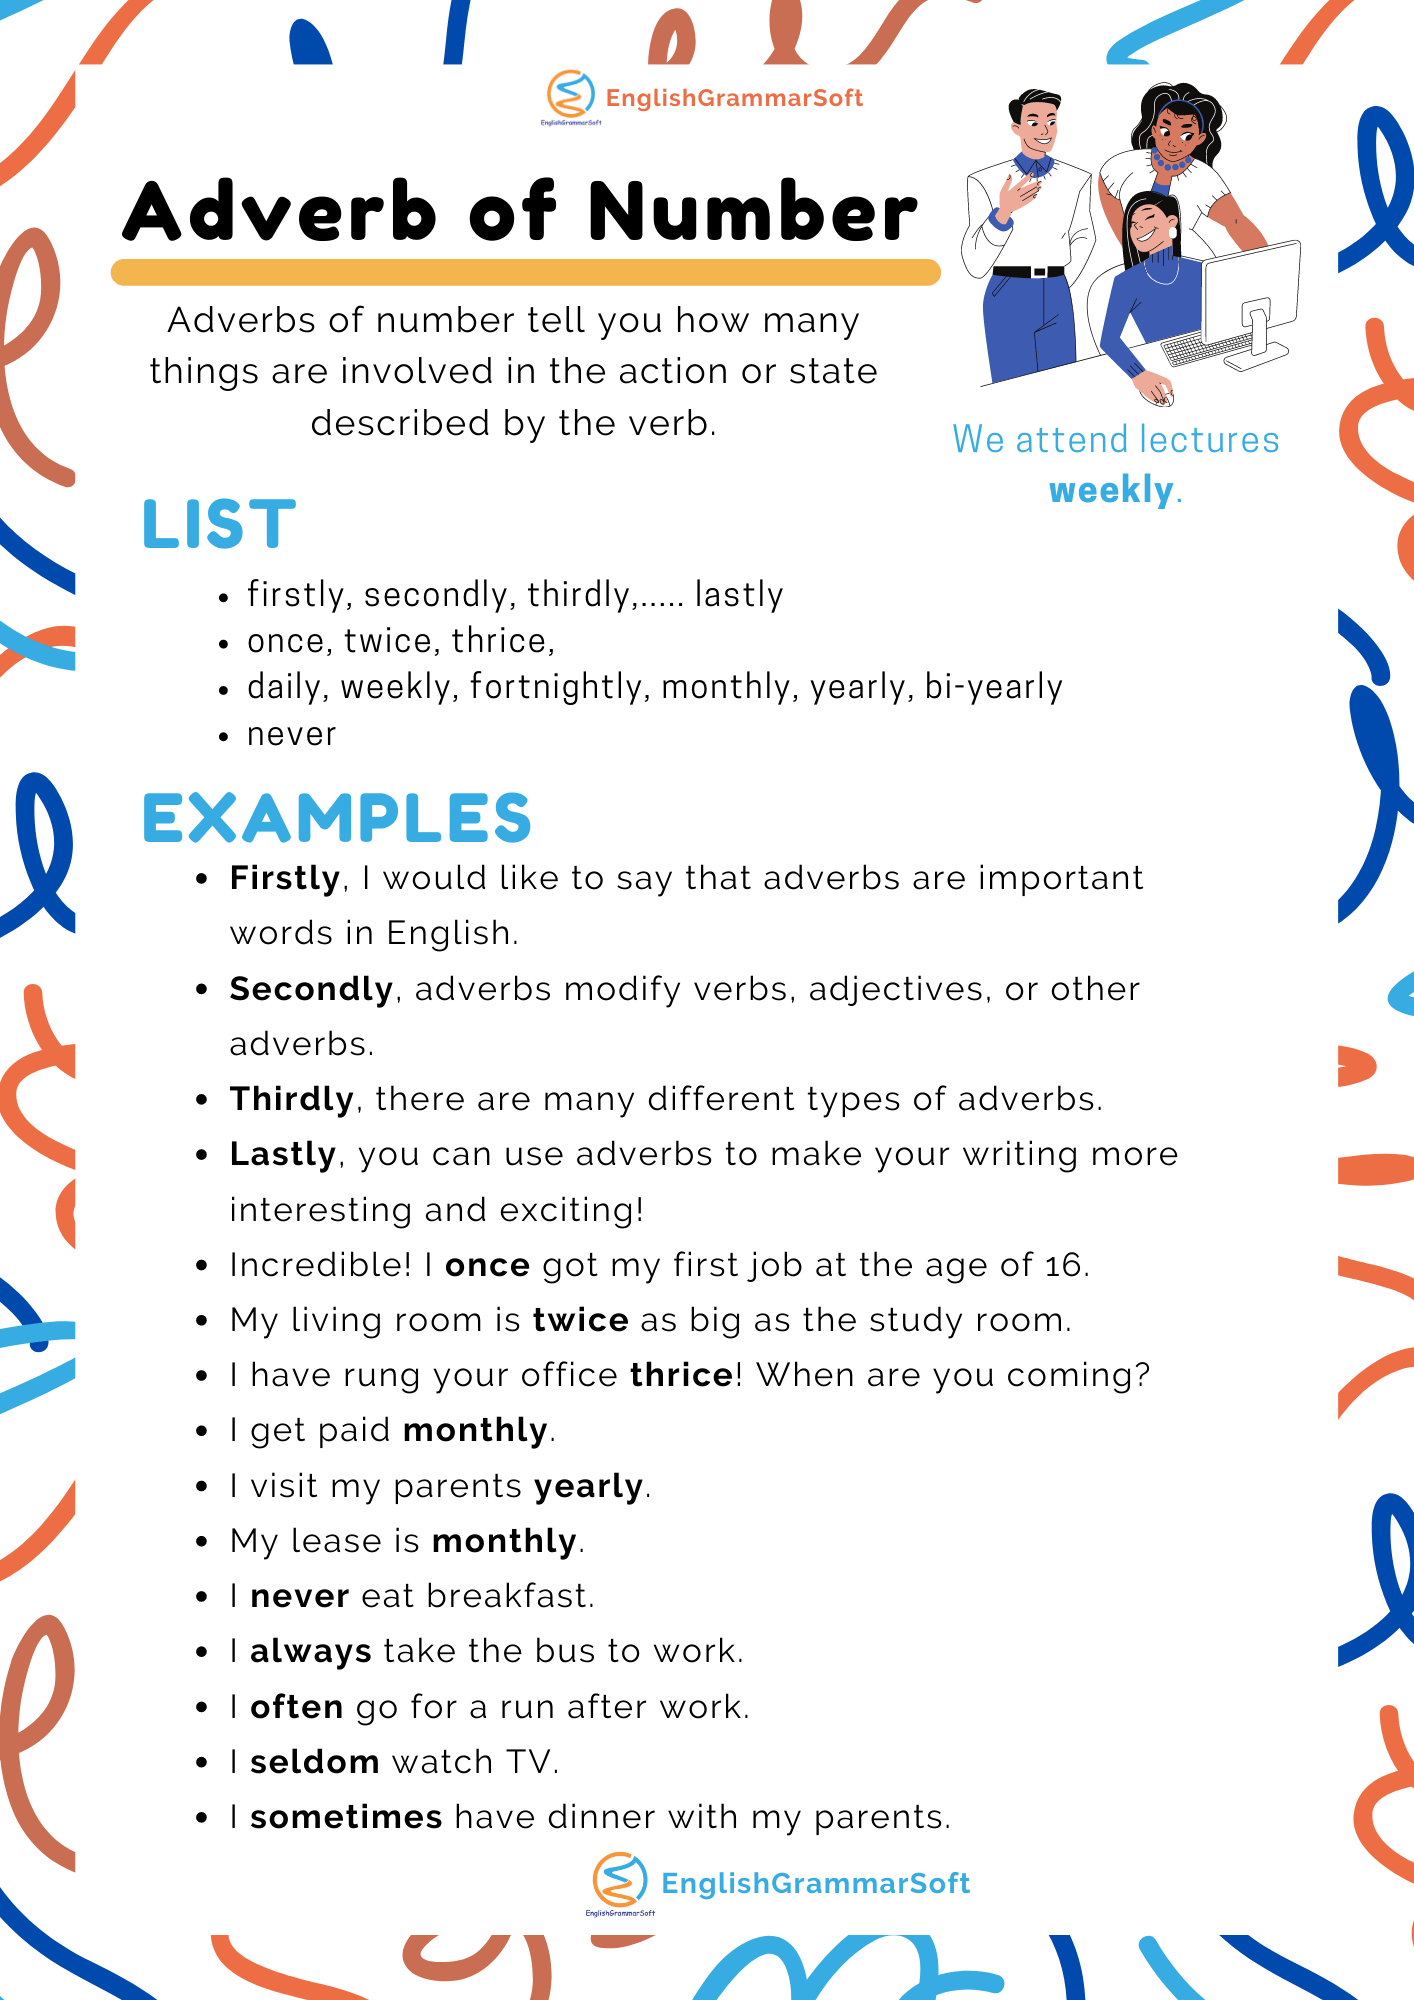 Adverbs of Number (Examples & List)